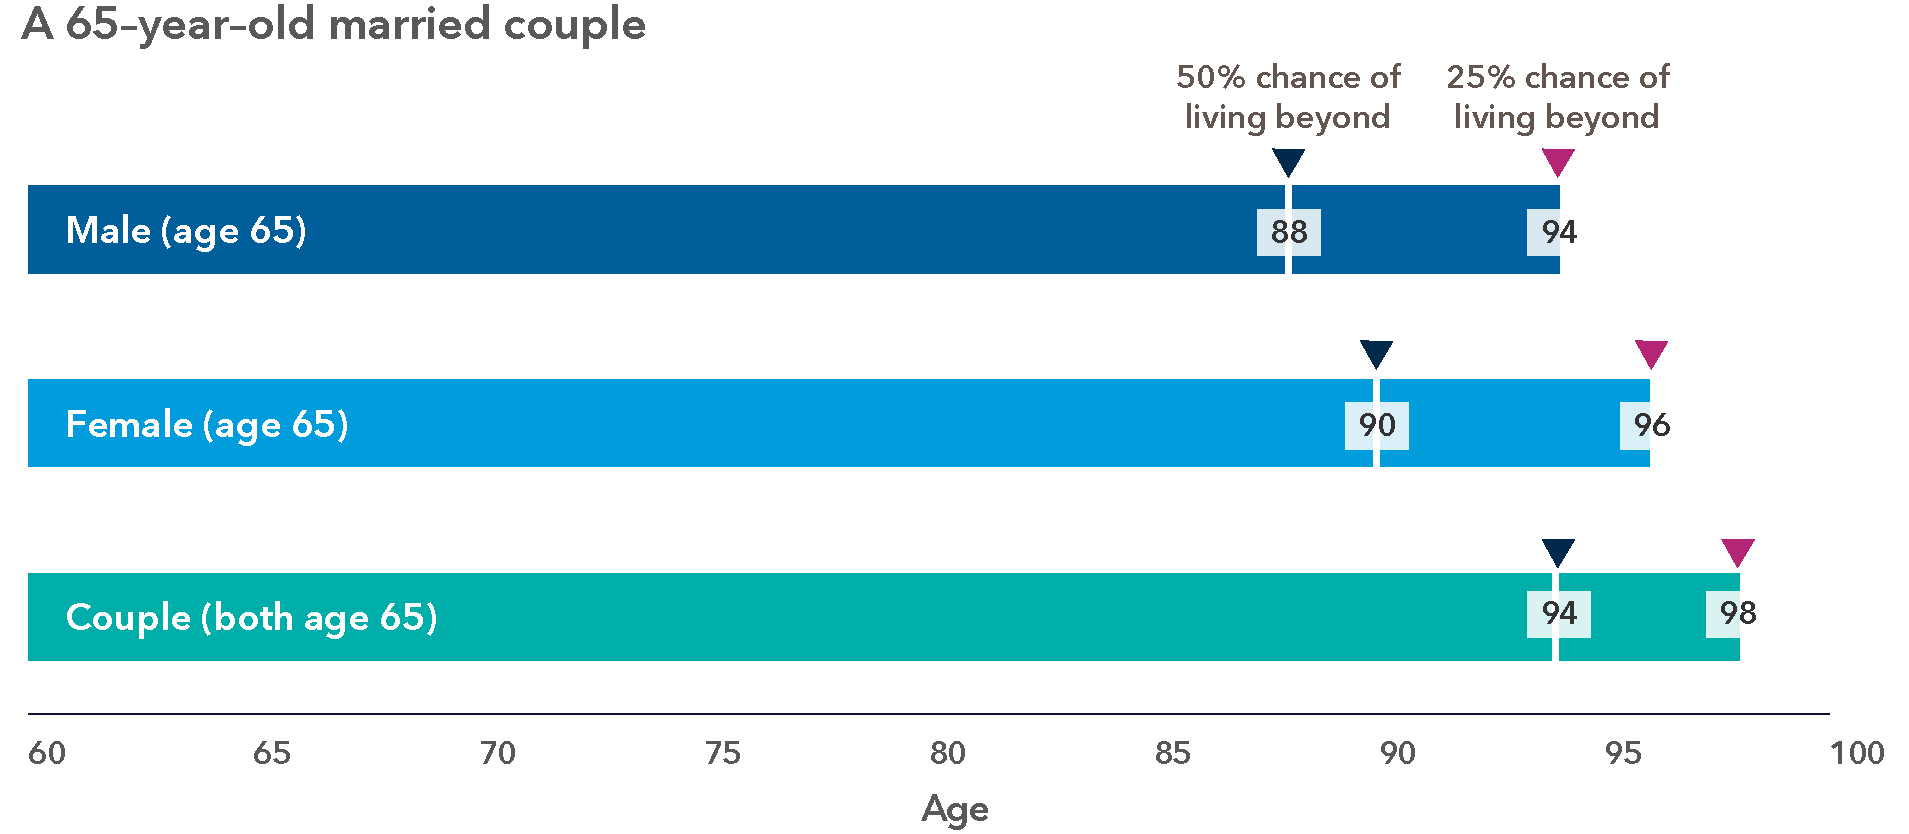 This is a bar chart with three bars illustrating estimated life expectancy for a 65-year-old heterosexual married couple. The top bar shows that a 65-year-old male has a 50% chance of living beyond age 88 and a 25% chance of living beyond age 94. The middle bar shows that a 65-year-old female has a 50% chance of living beyond age 90 and a 25% chance of living beyond age 96. The bottom bar shows the combined life expectancy of the married couple, showing a 50% chance of living beyond age 94 and a 25% chance of living beyond age 98.